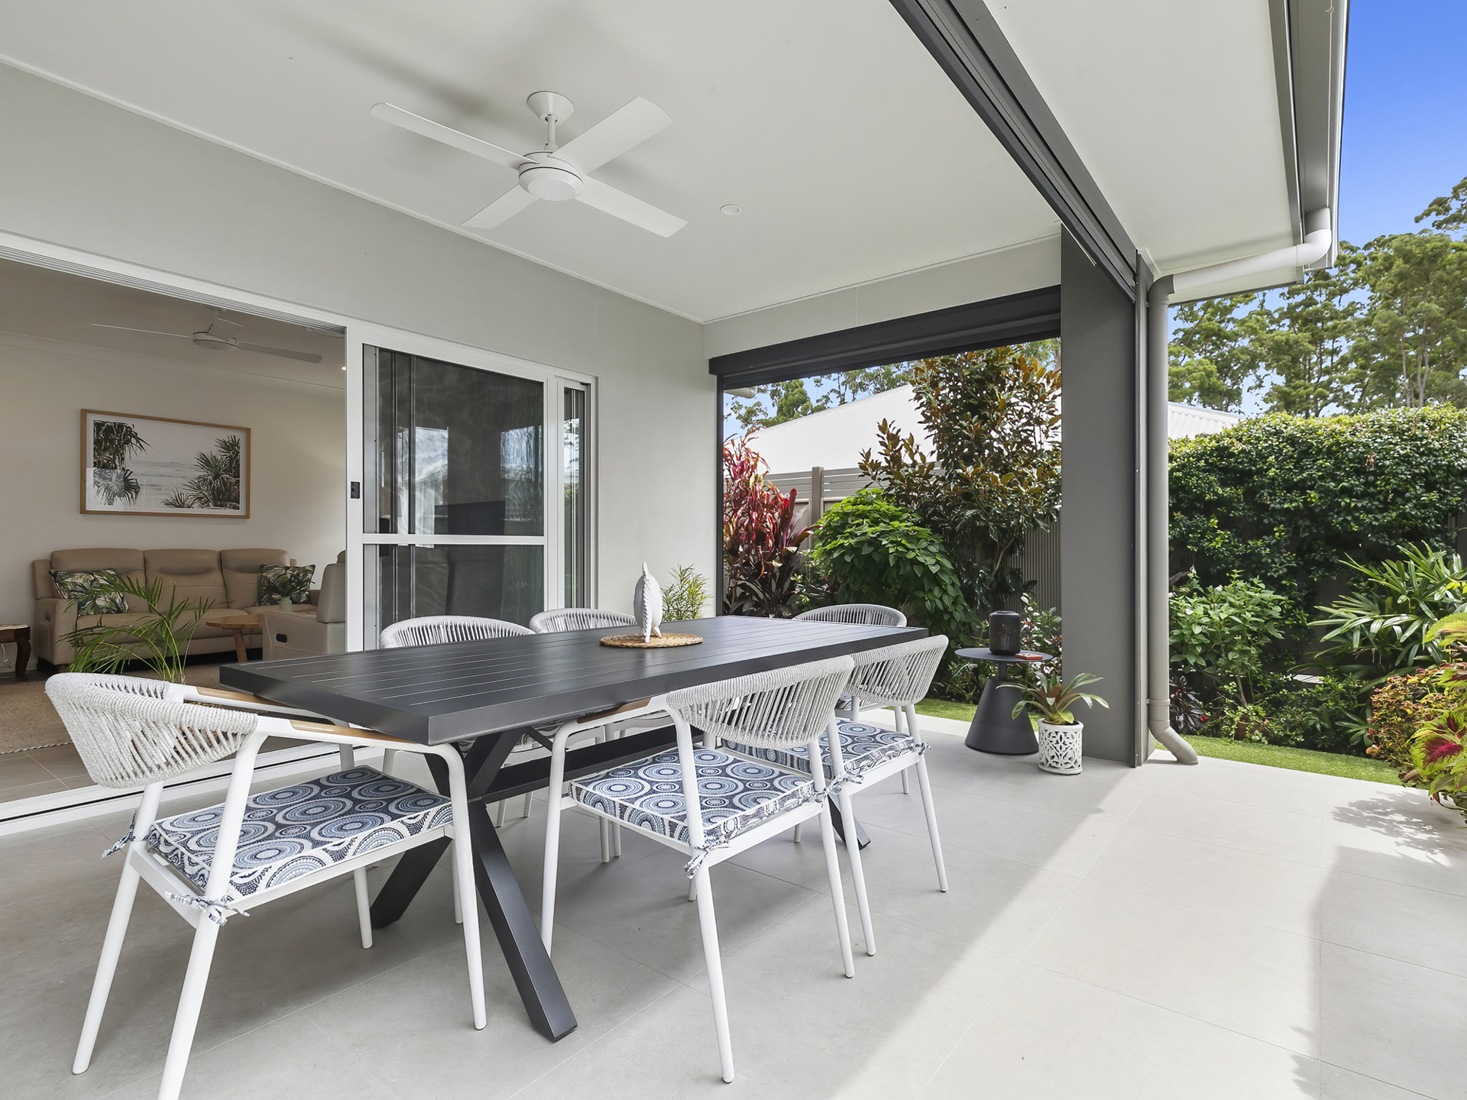 exterior rear patio with table and chairs at home in b by halcyon lifestyle community.